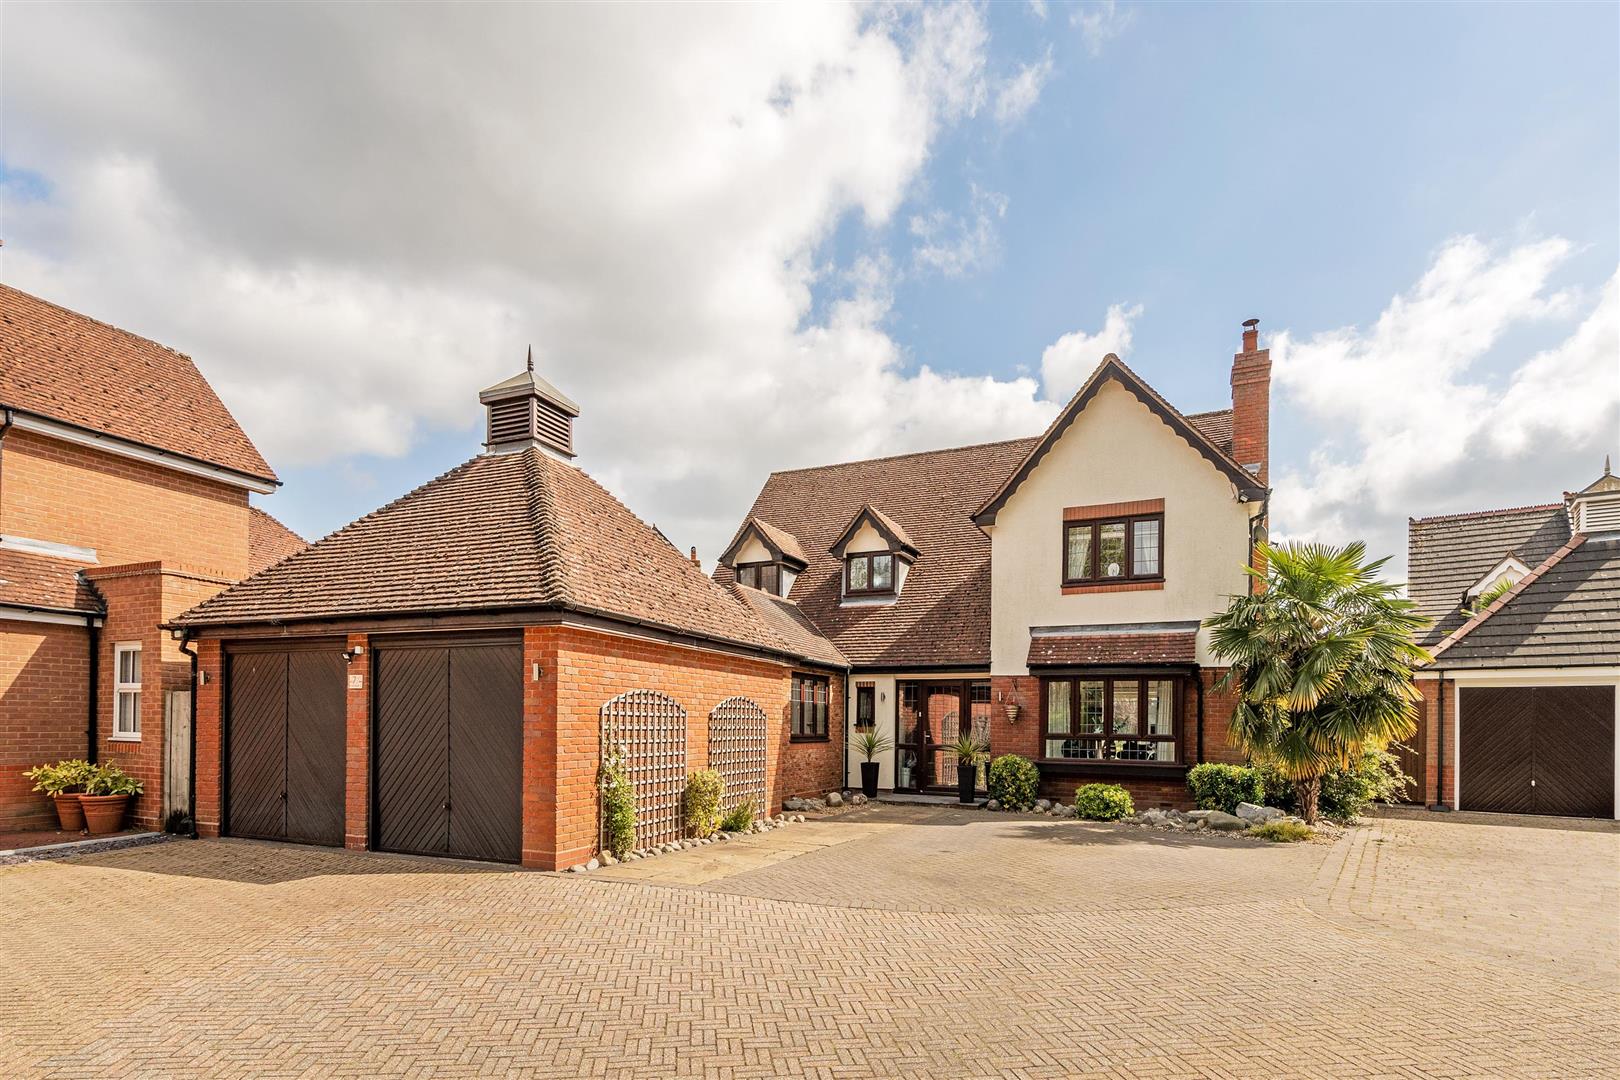 5 bed detached house for sale in Kirton Grove, Solihull 2